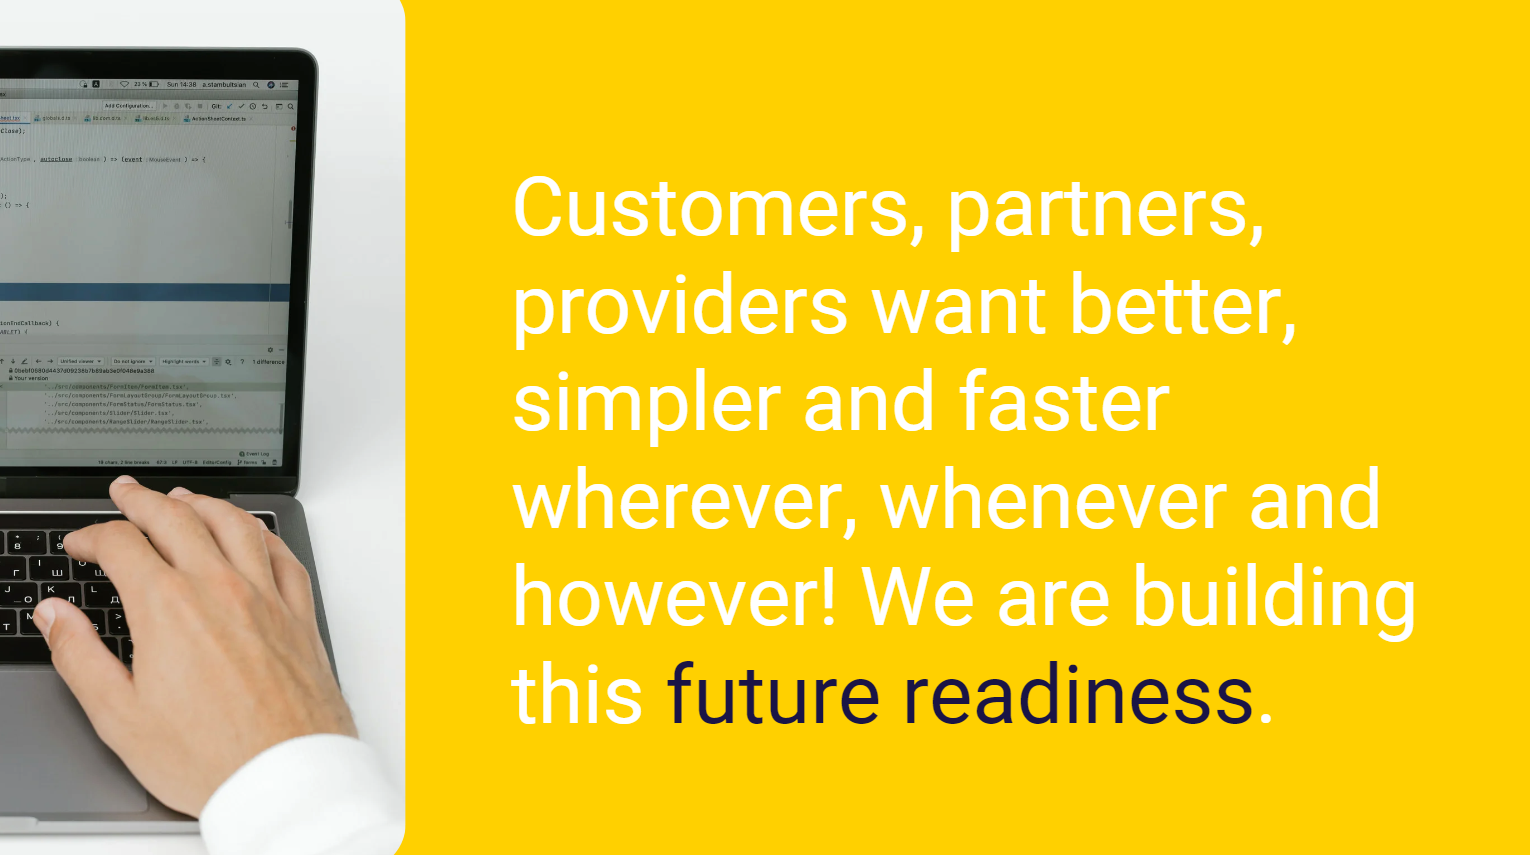 Customers, partners, providers want better, simpler and faster wherever, whenever and however! We are building this future readiness.